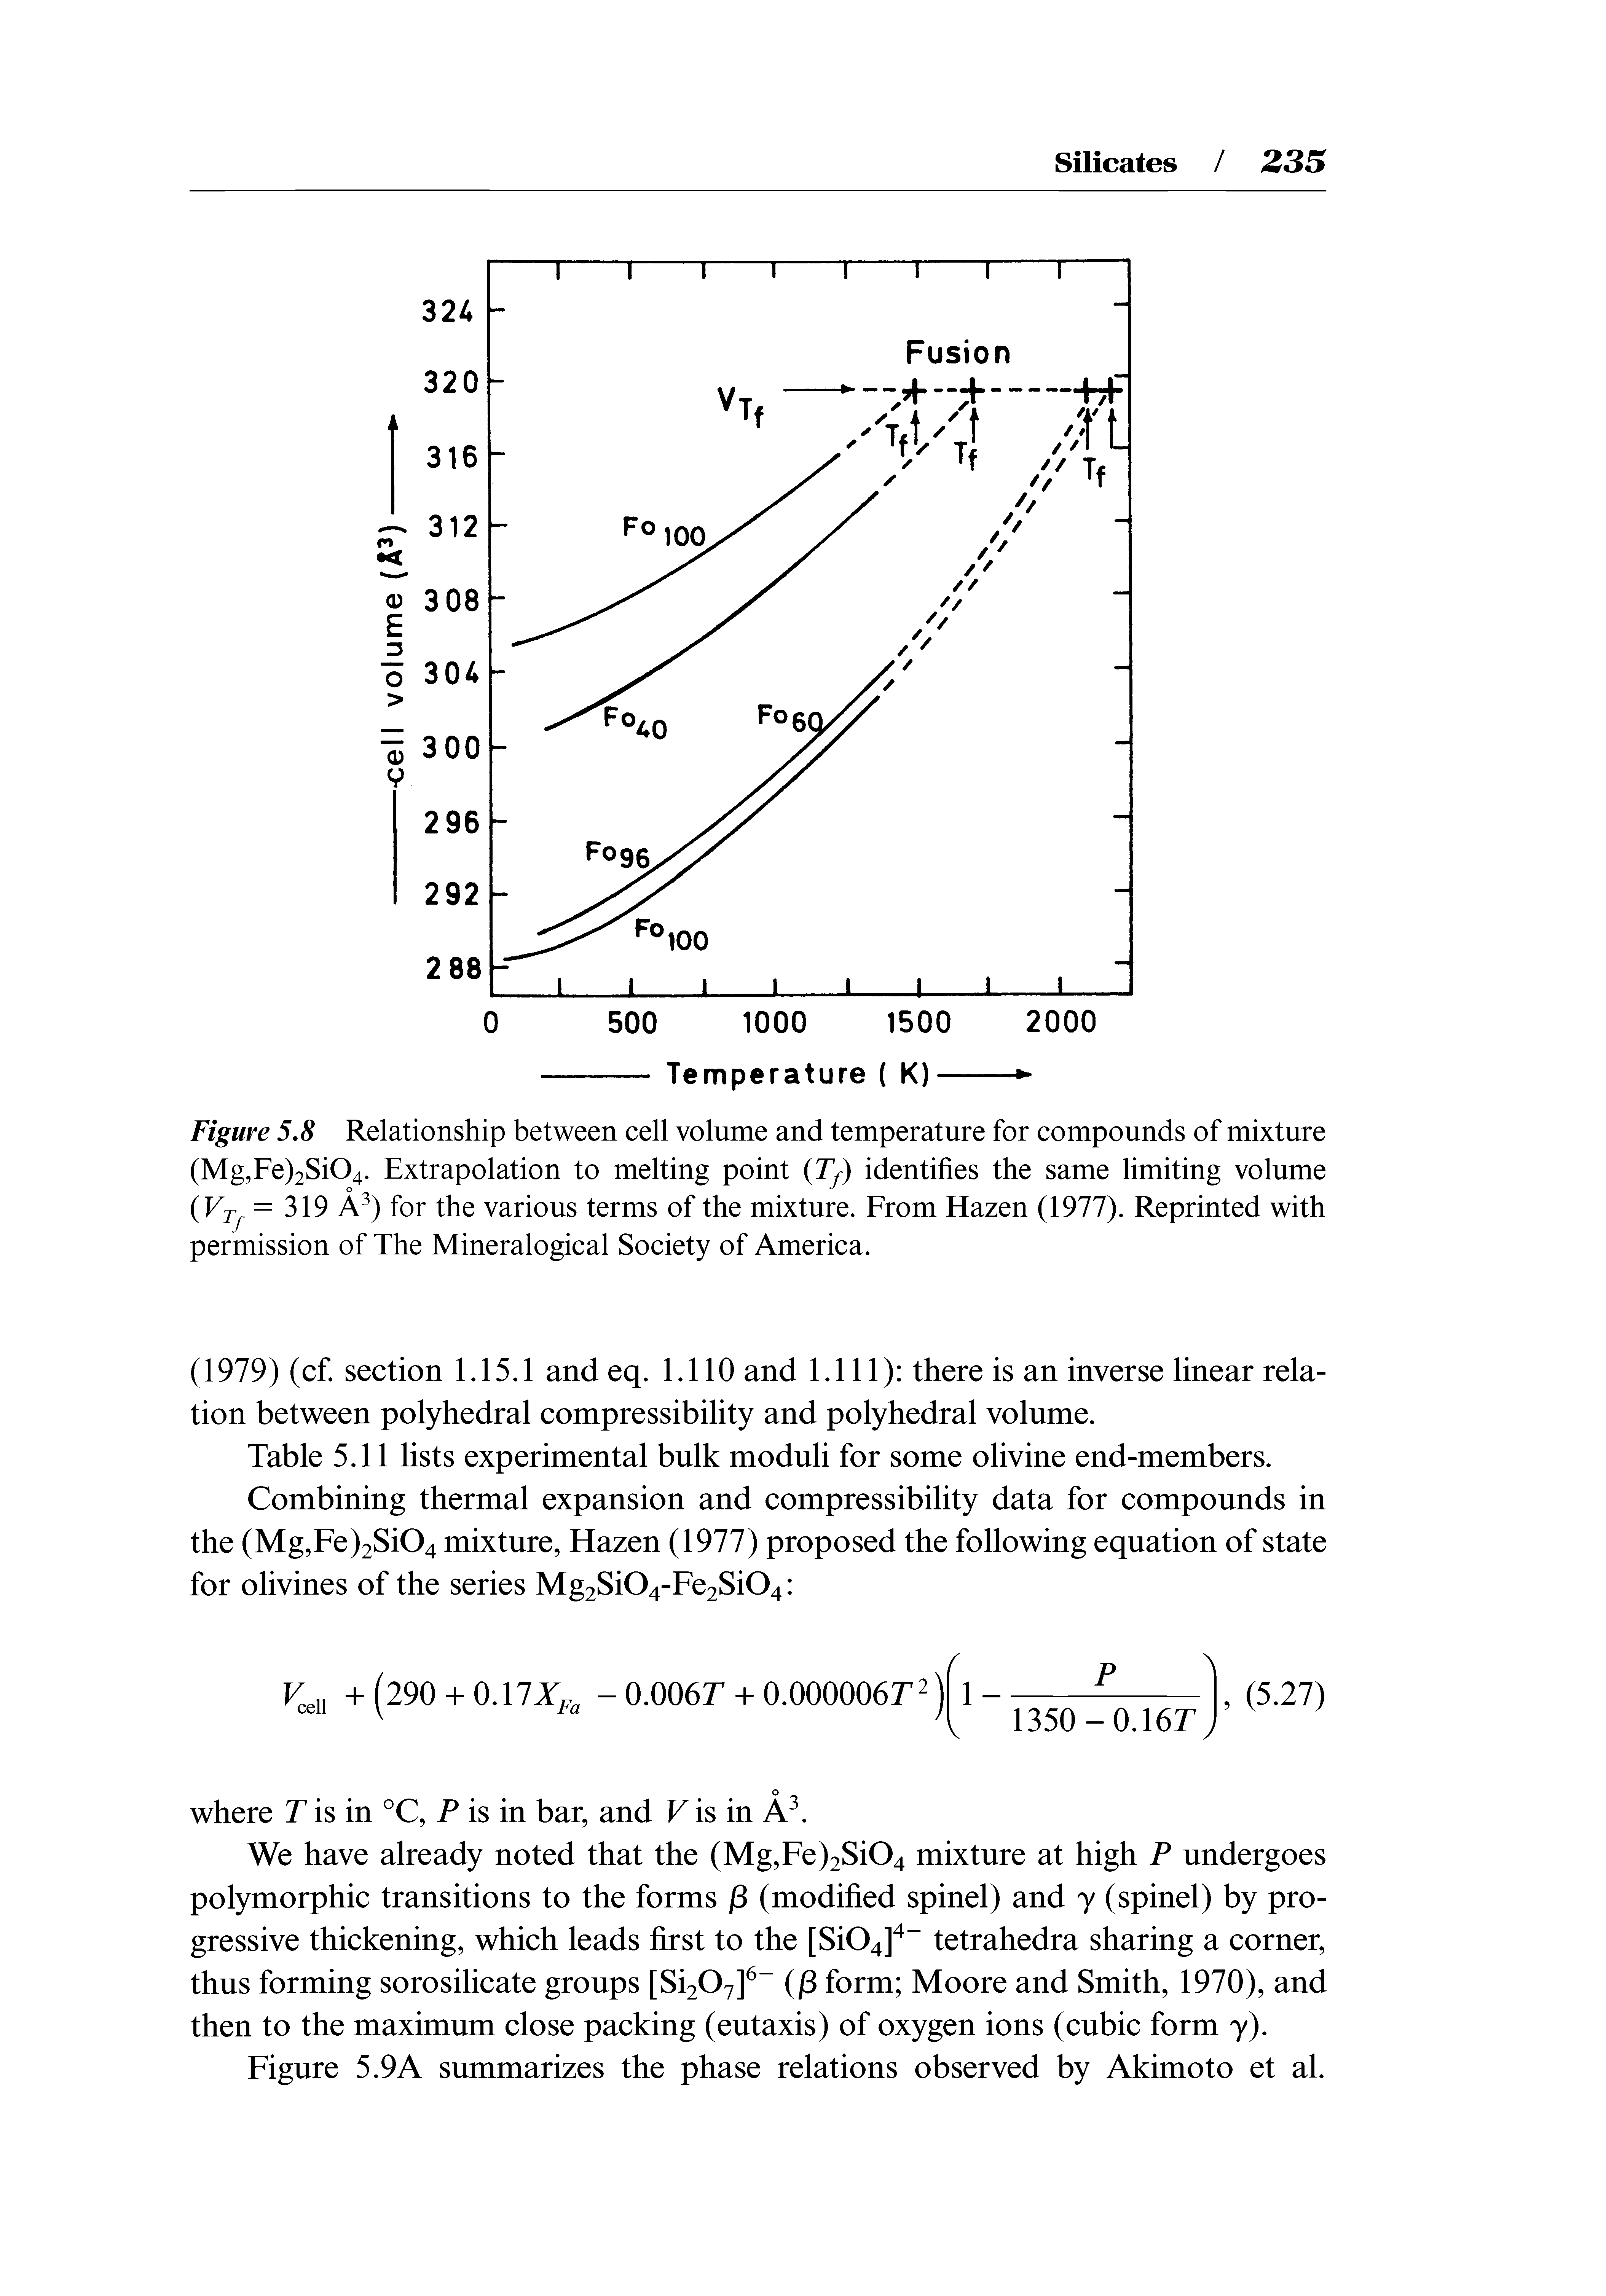 Figure 5,8 Relationship between cell volume and temperature for compounds of mixture (Mg,Fe)2Si04. Extrapolation to melting point (7 ) identifies the same limiting volume (Fjy =319 A ) for the various terms of the mixture. From Hazen (1977). Reprinted with permission of The Mineralogical Society of America.